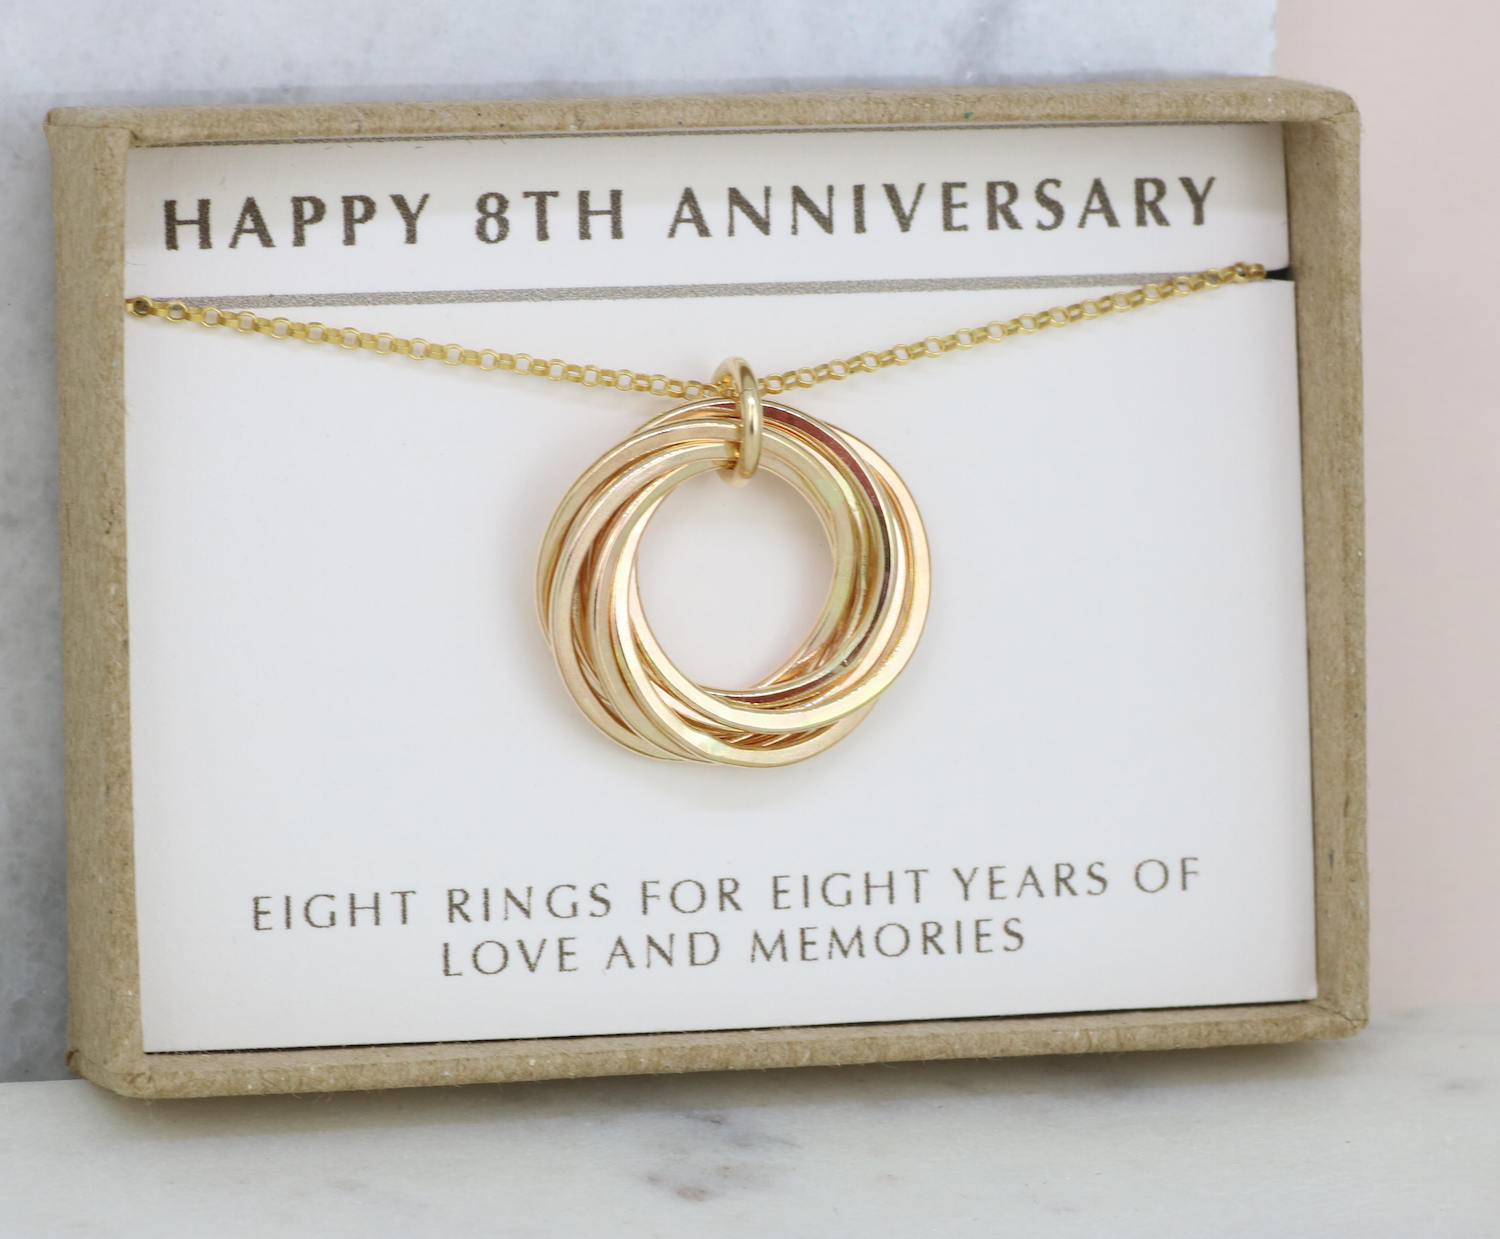 8 Years Anniversary Gift Ideas
 The Best Ideas for 8 Year Anniversary Gift Ideas for Men